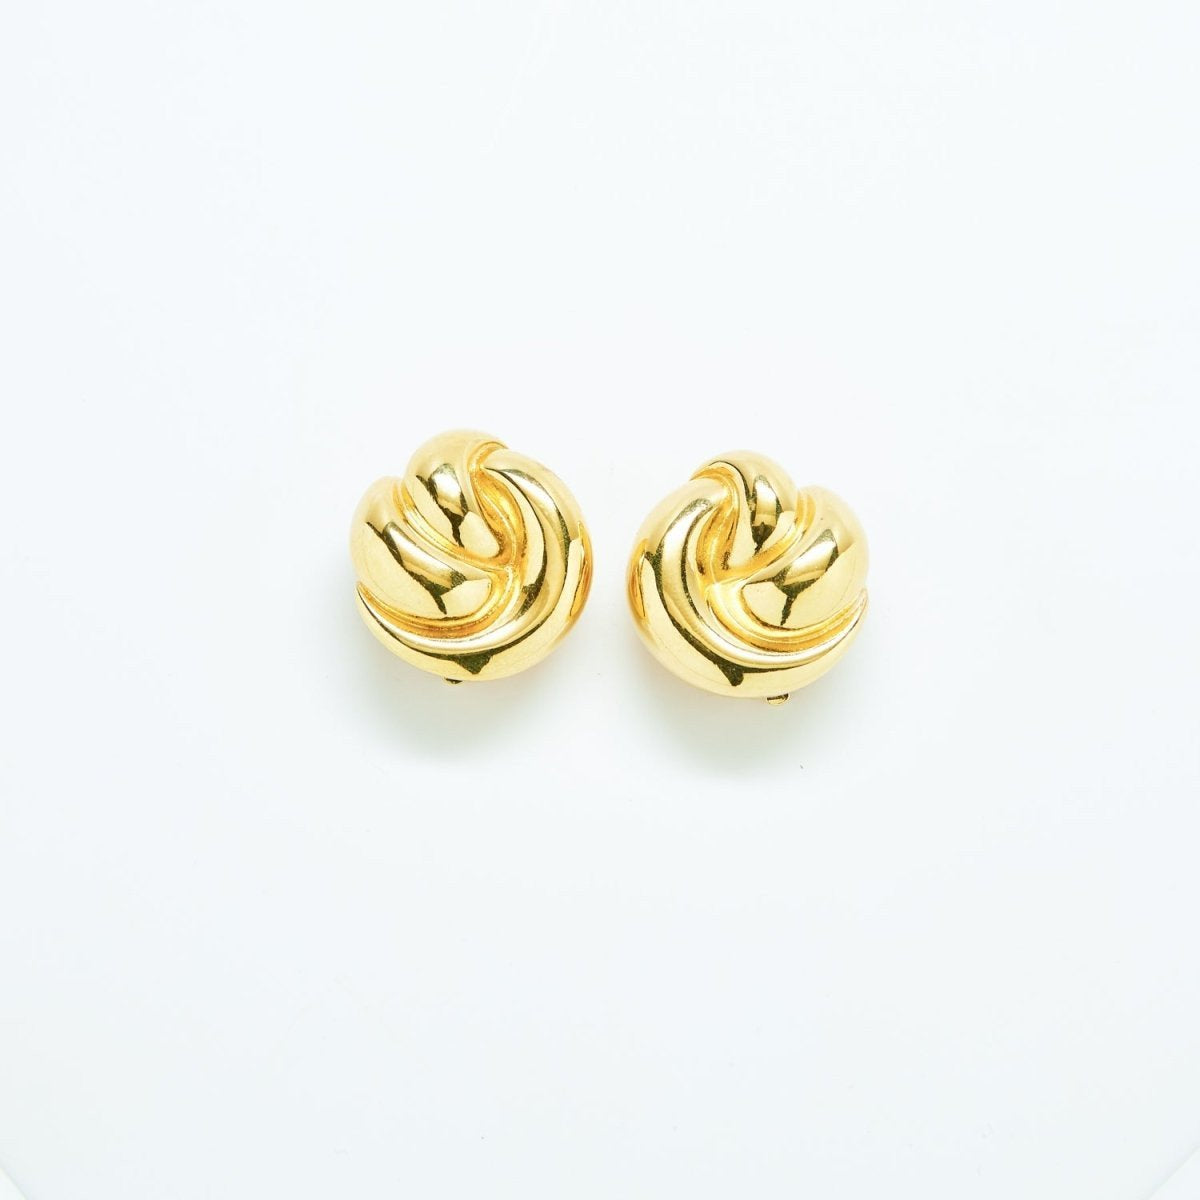 Vintage St. John Double Knot Earrings - Admiral Row